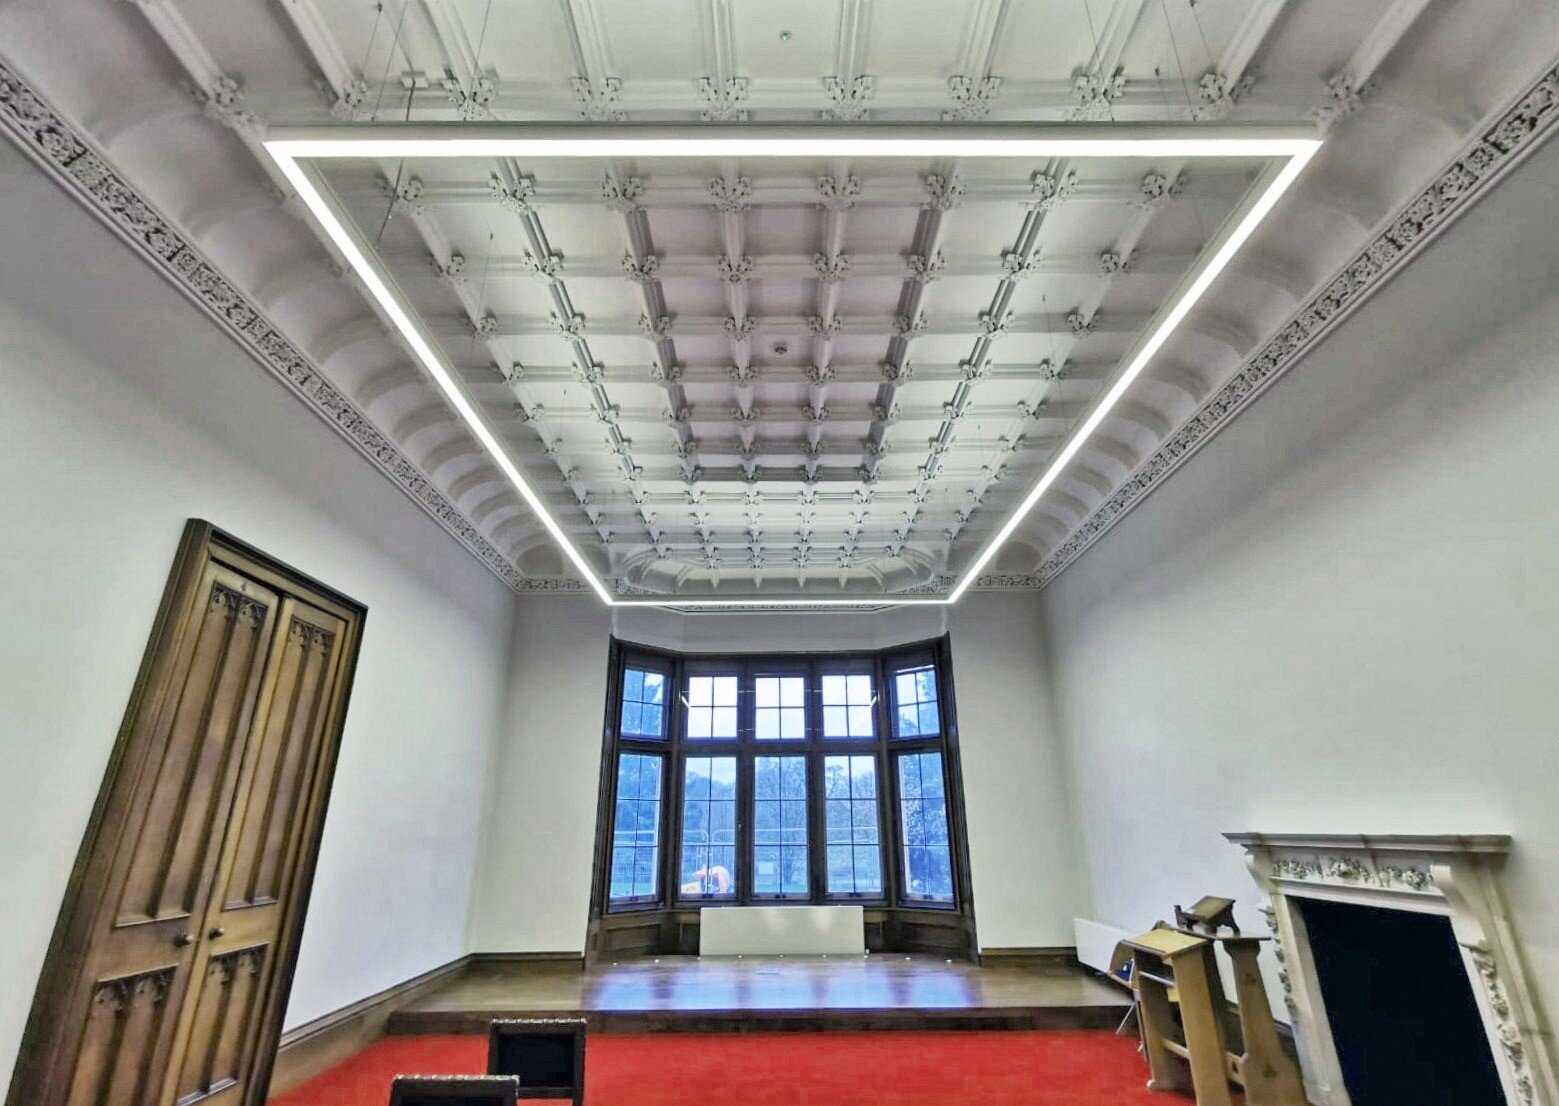 Interior lighting to refurbished rooms within the Grade II listed Beckett House, Shrivenham